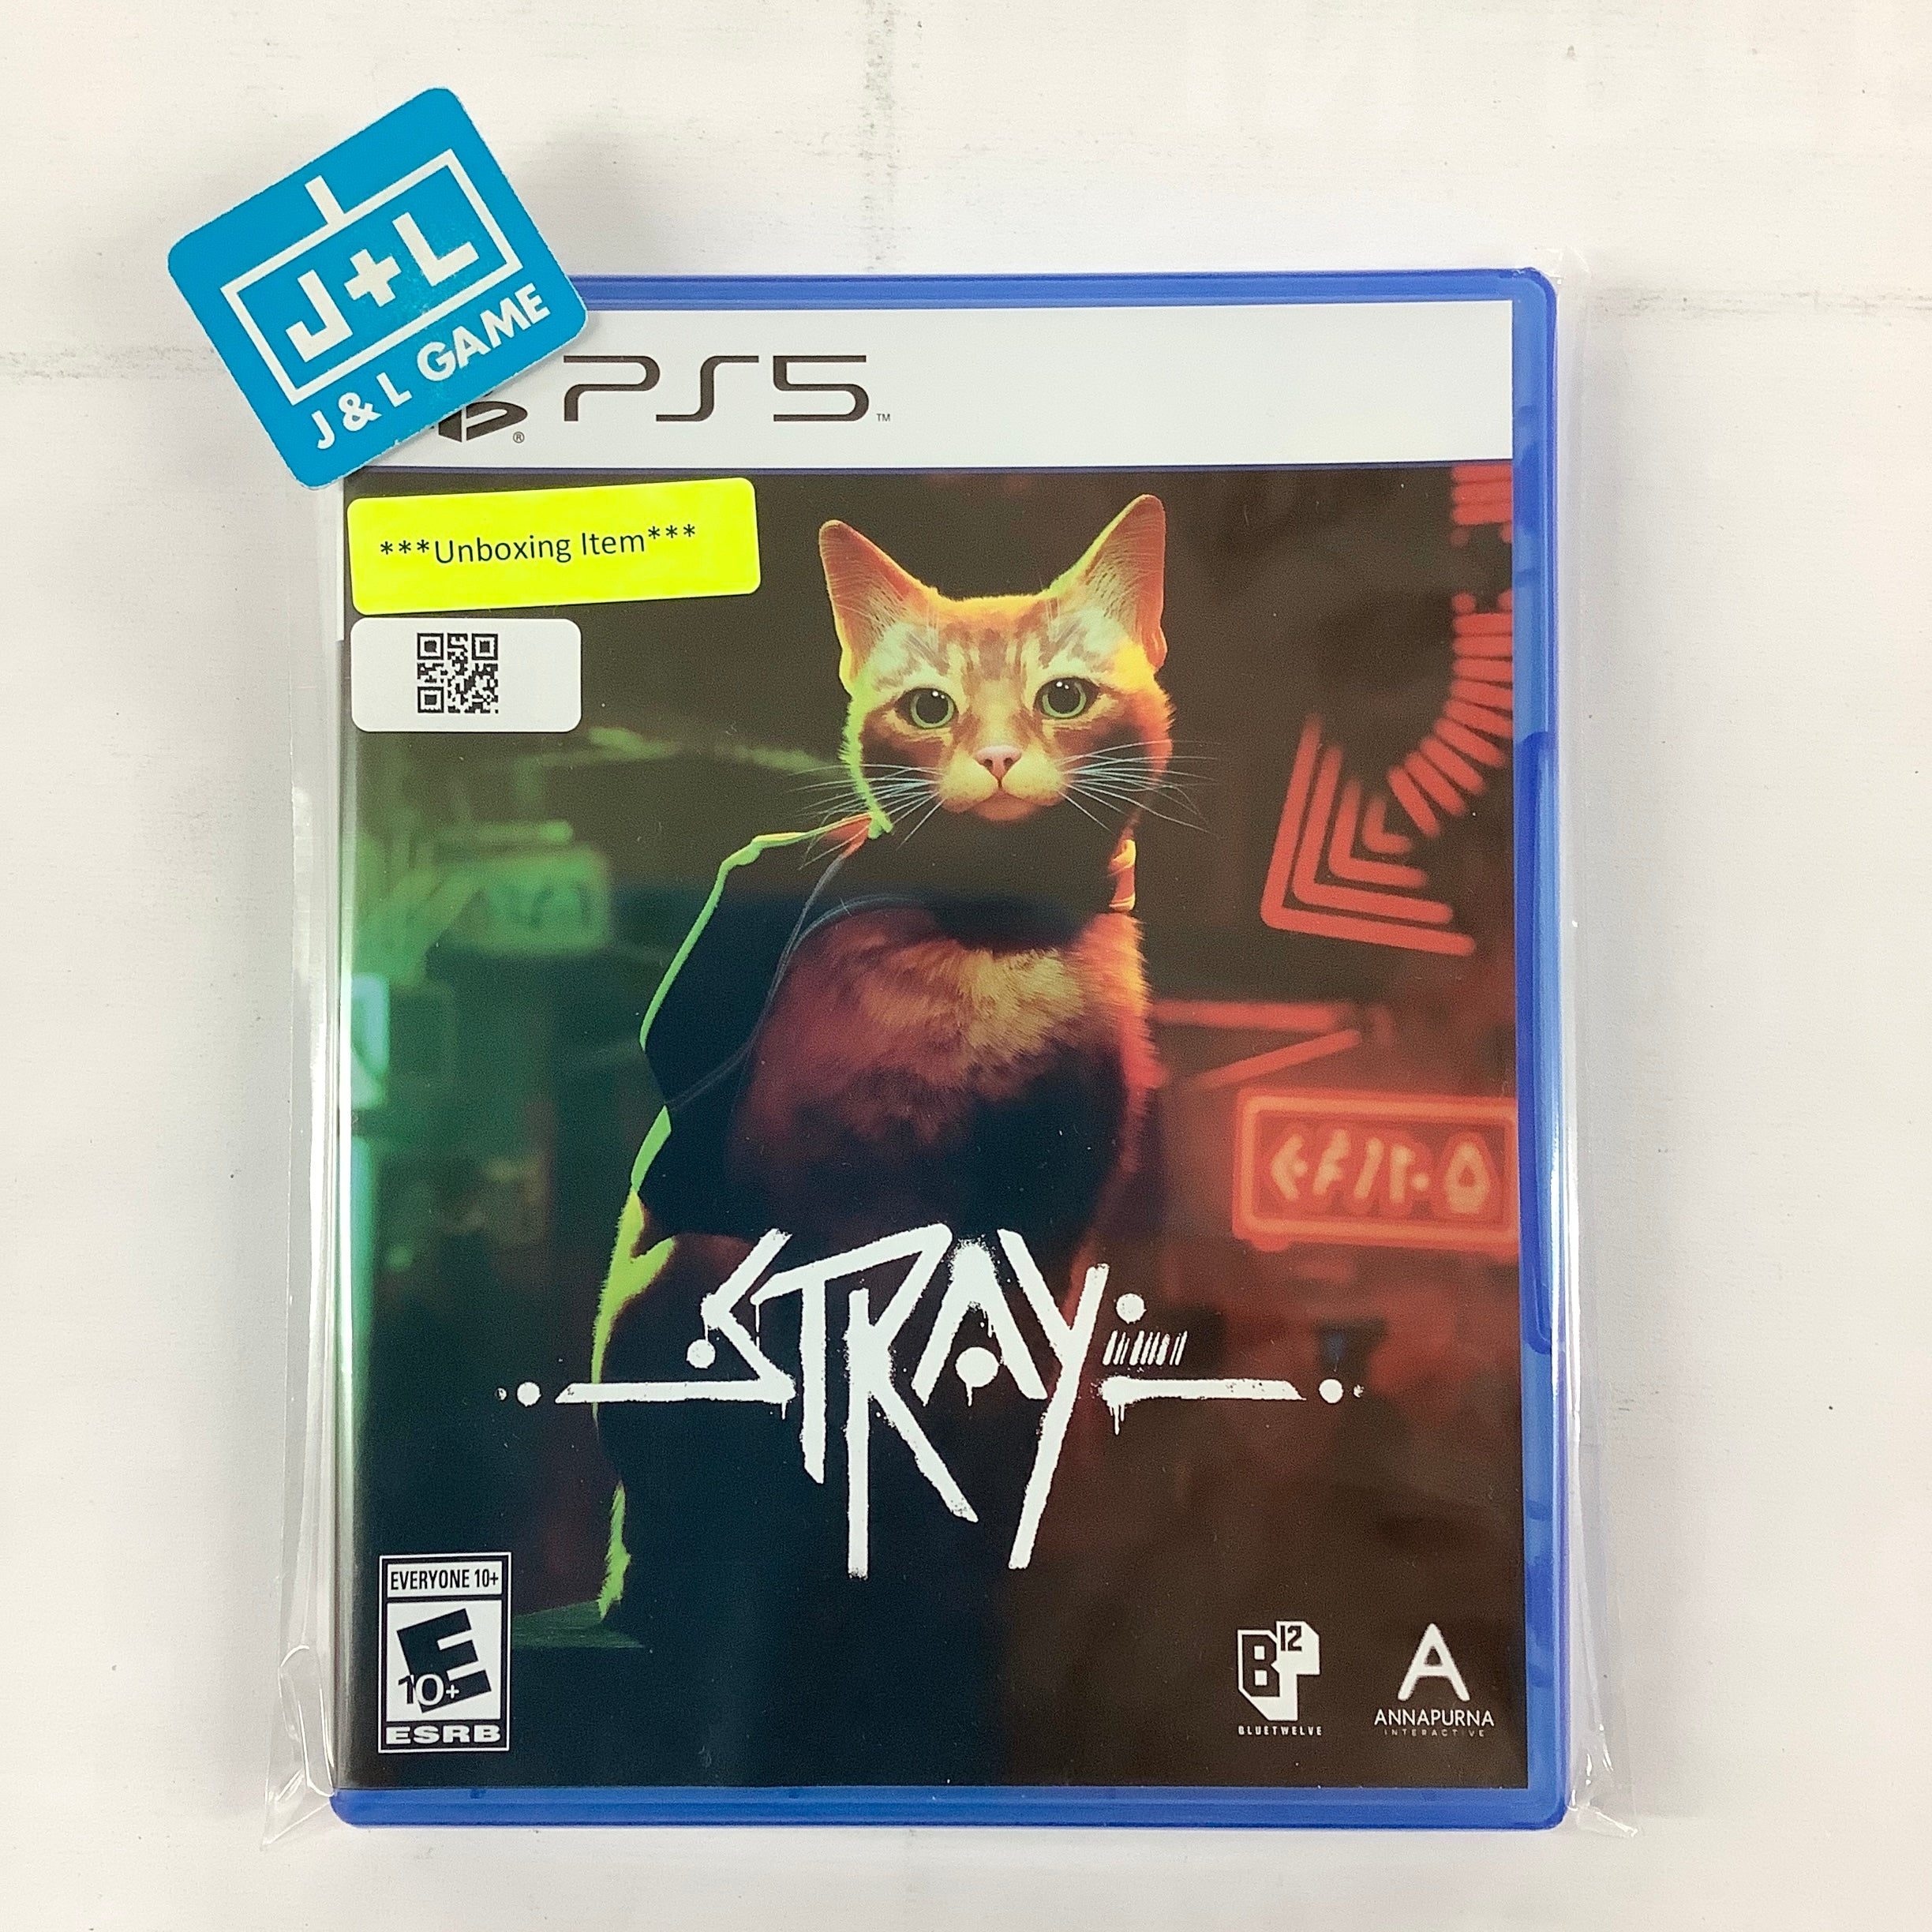 Stray - (PS5) PlayStation 5 [UNBOXING] Video Games iam8bit   